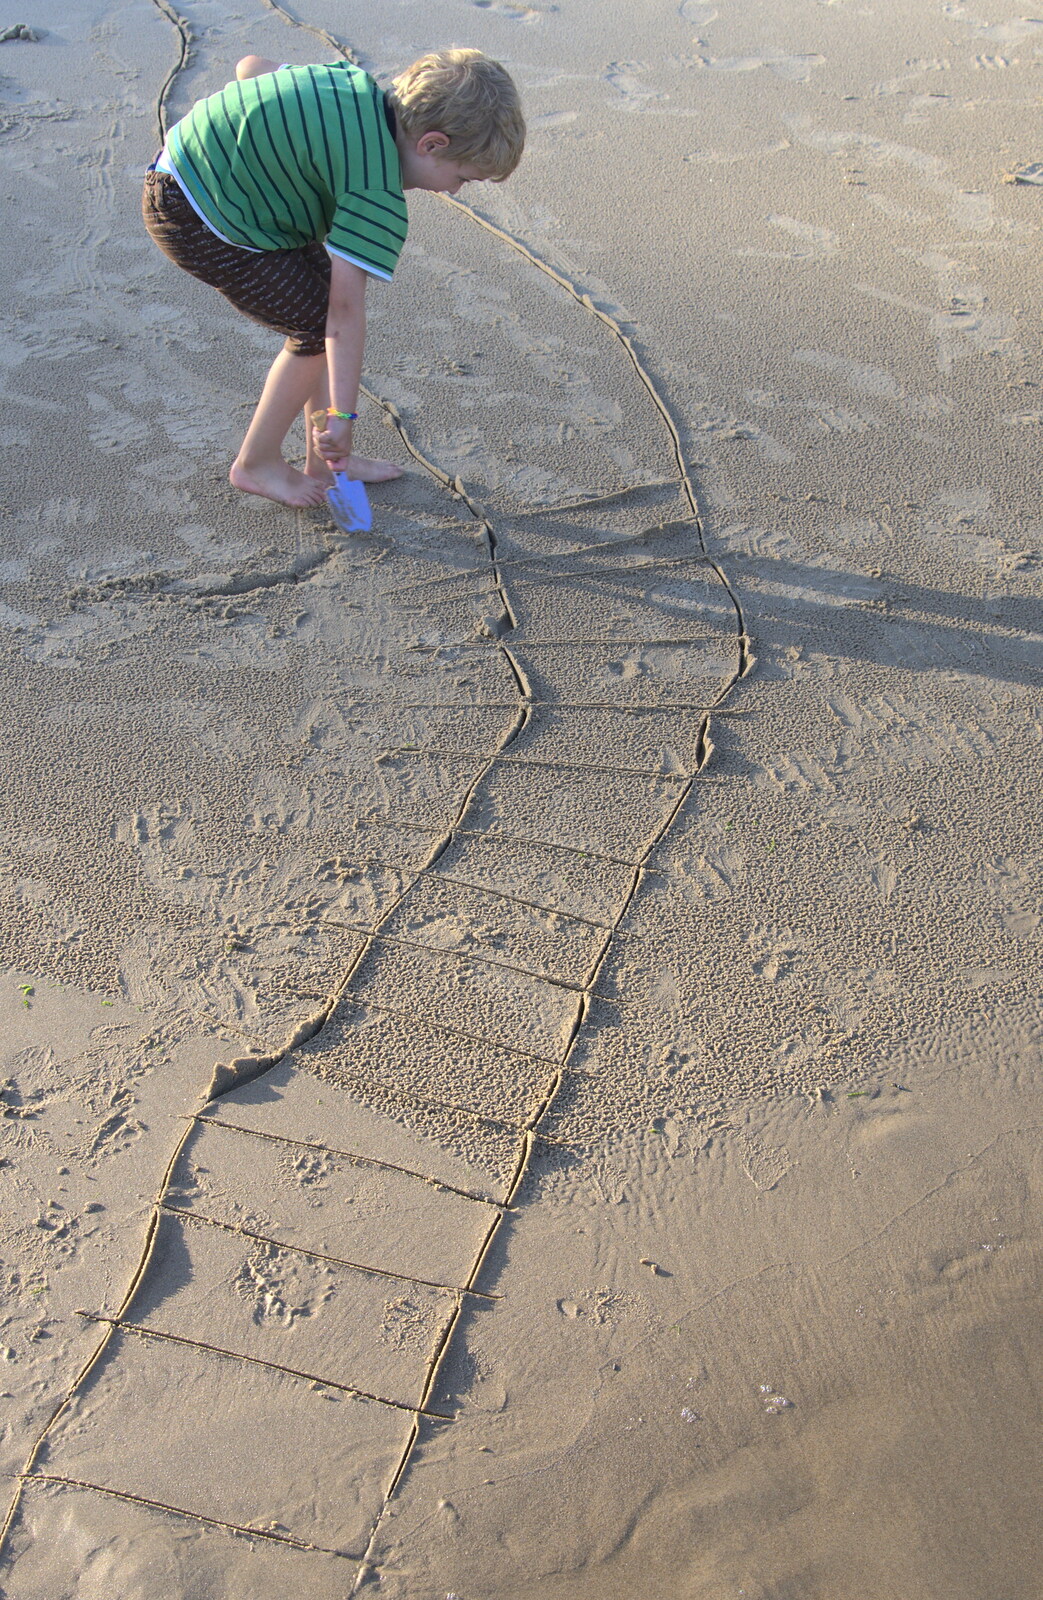 Fred draws some sort of ladder in the sand from Camping at Silver Strand, Wicklow, County Wicklow, Ireland - 7th August 2014